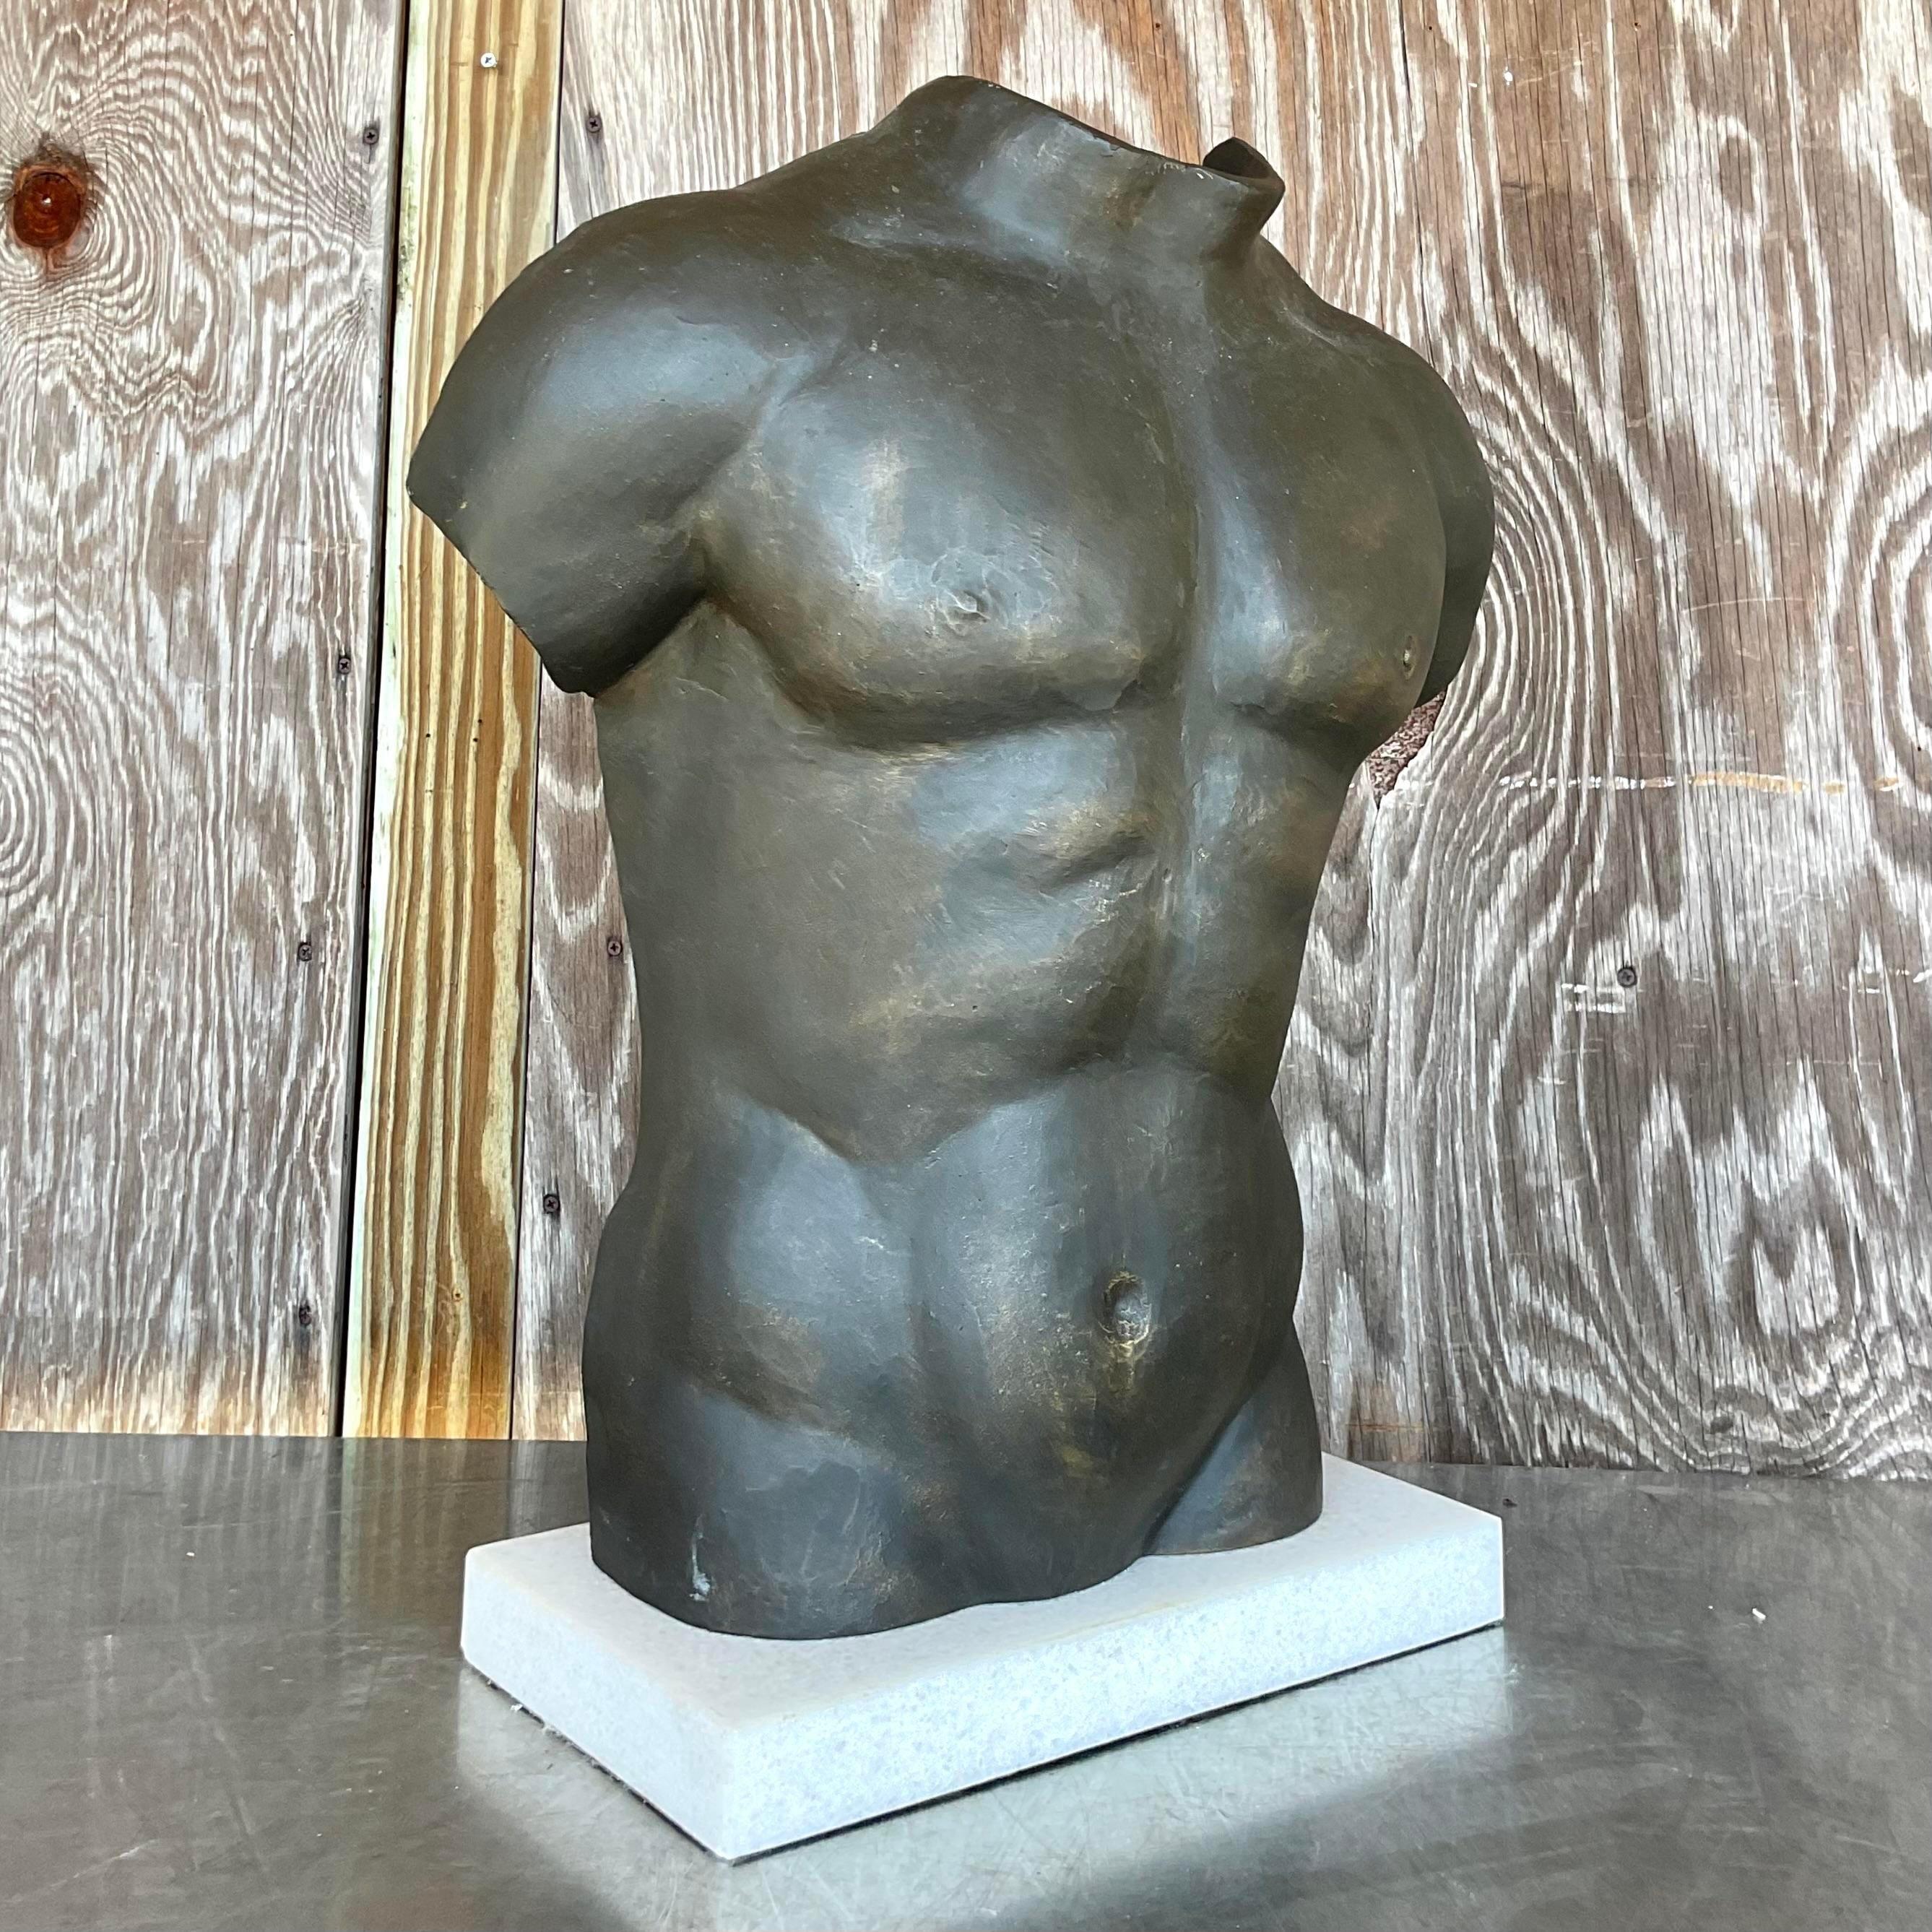 Embrace the raw beauty of this Vintage Boho Patinated Sculpture of a Male Torso—an exquisite fusion of American craftsmanship and Bohemian sensibility. With its weathered patina and expressive form, this sculpture exudes a timeless allure that